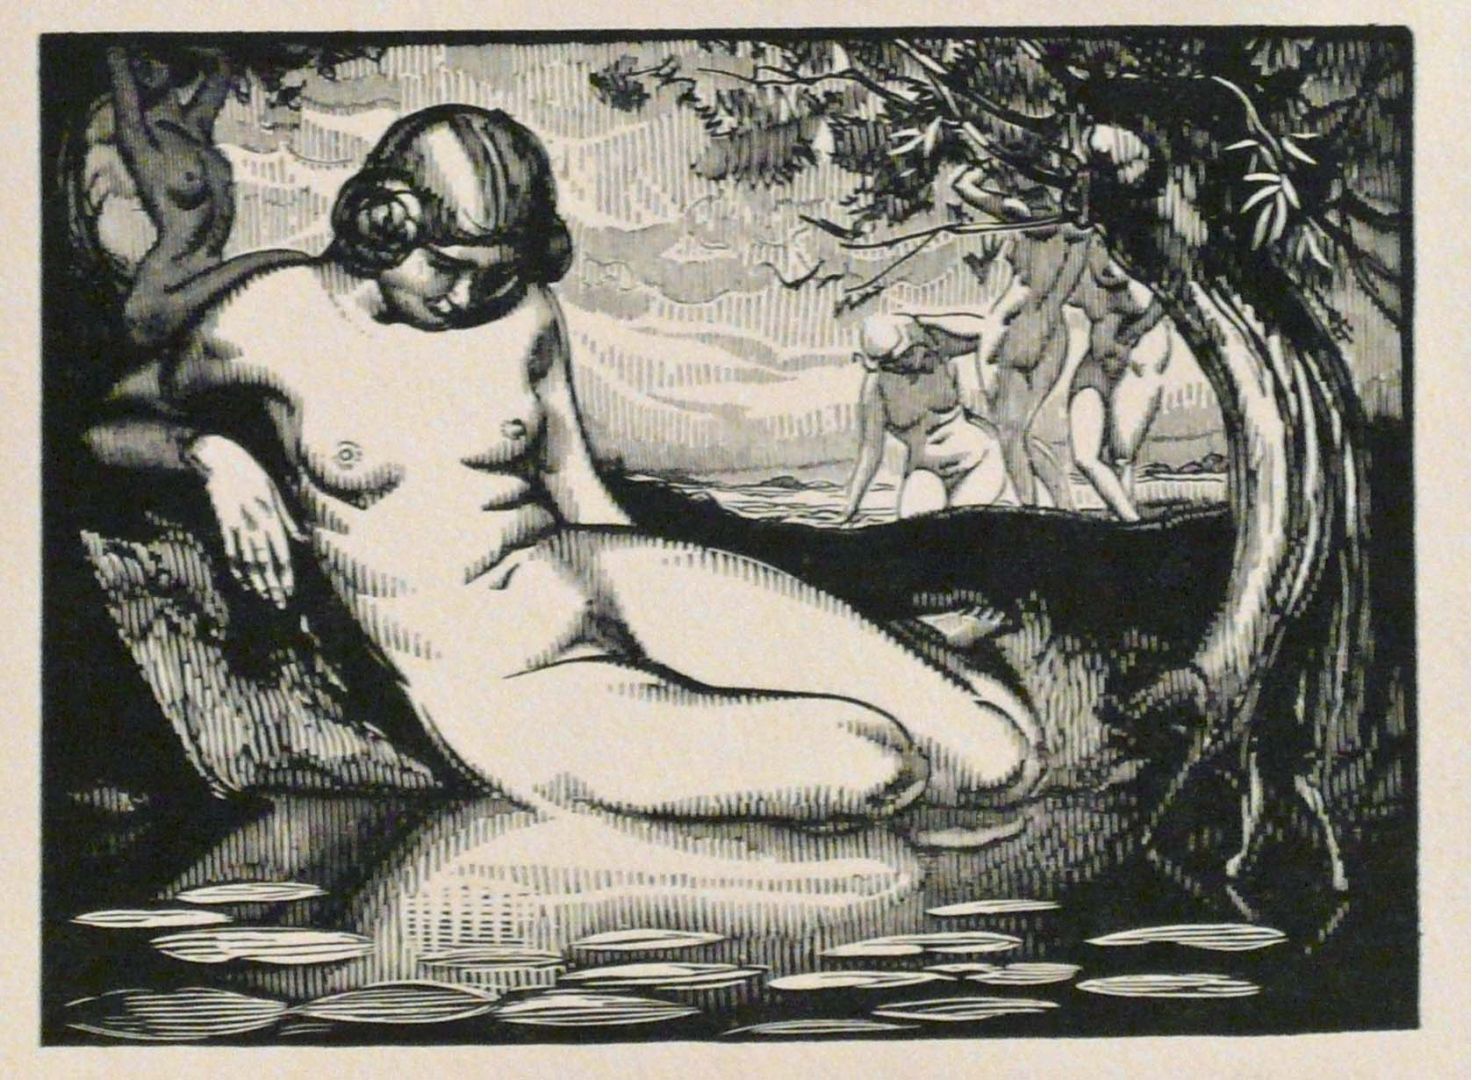 UNTITLED - NUDES AT A POND